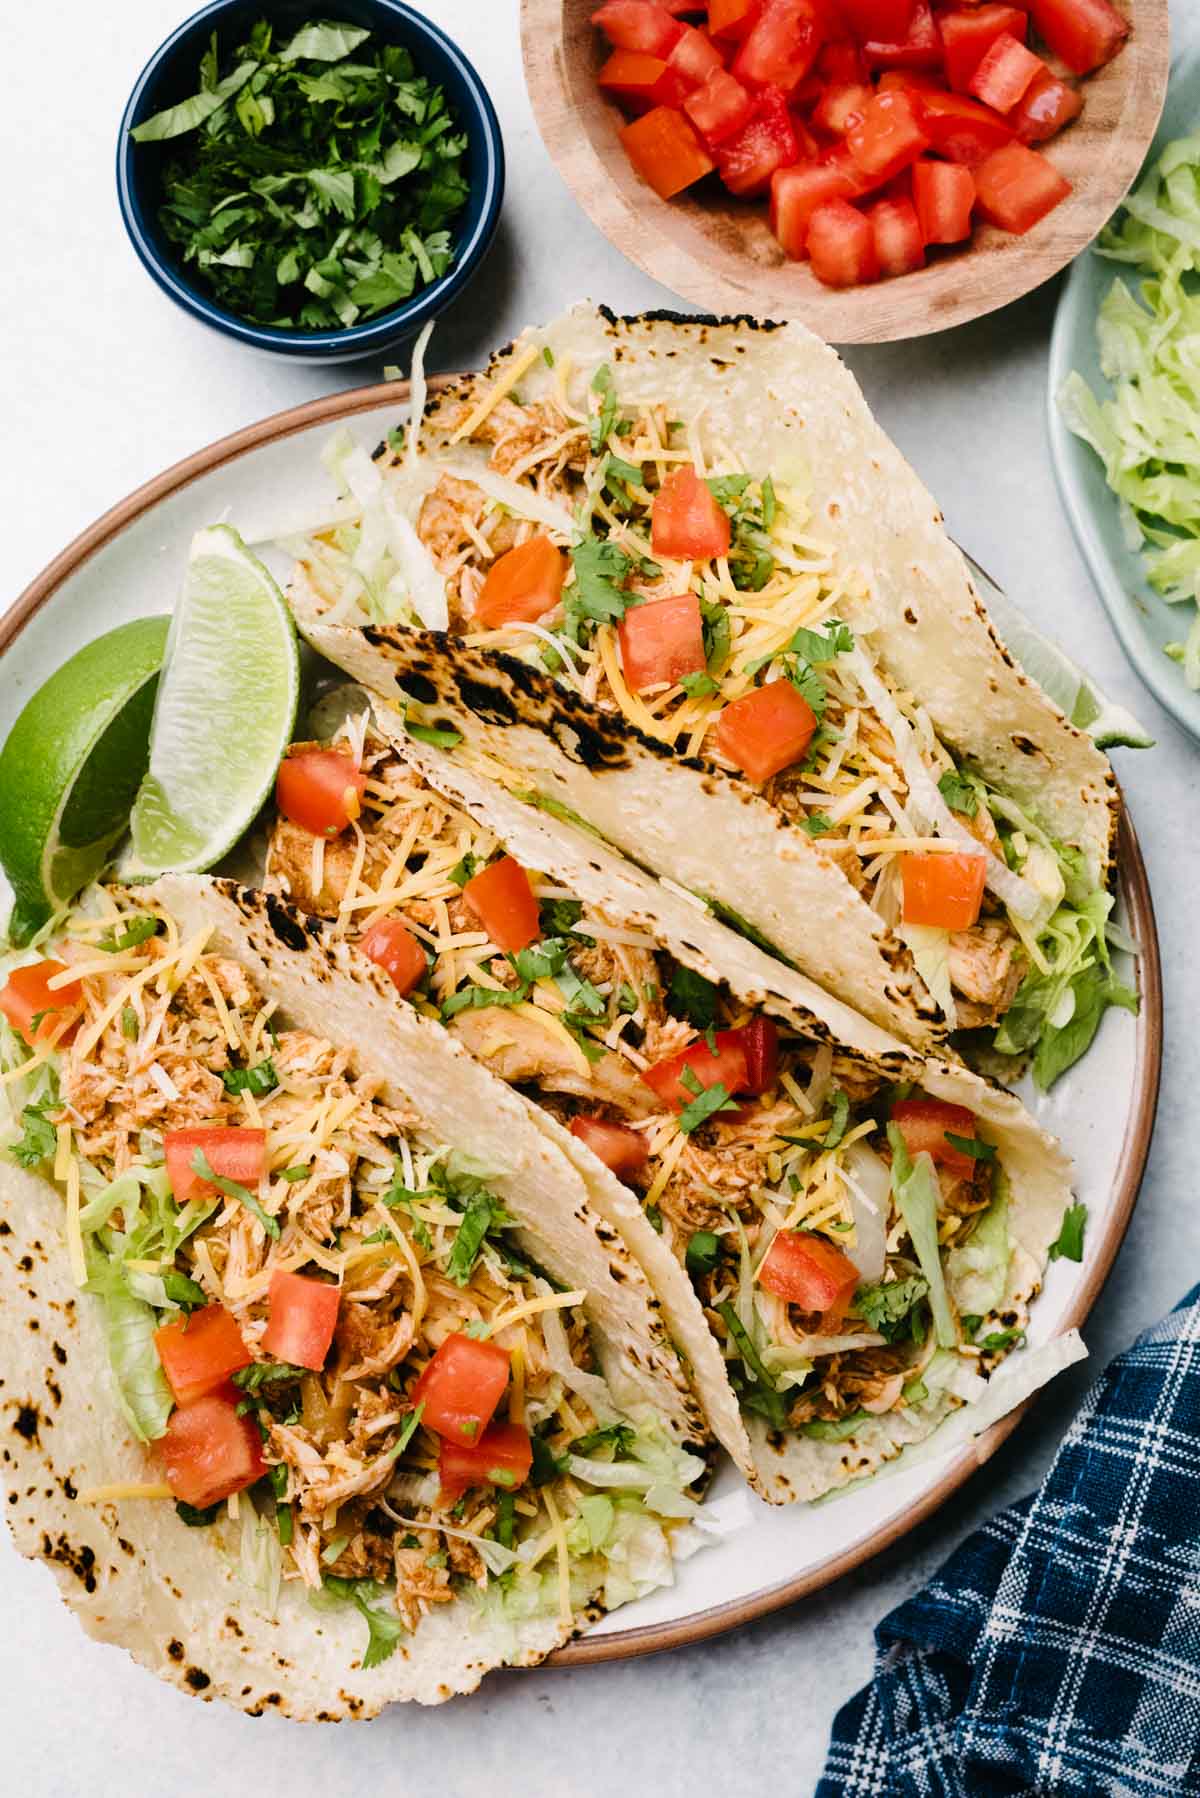 Three crockpot chicken tacos on a plate with small bowls of garnishes to the side.